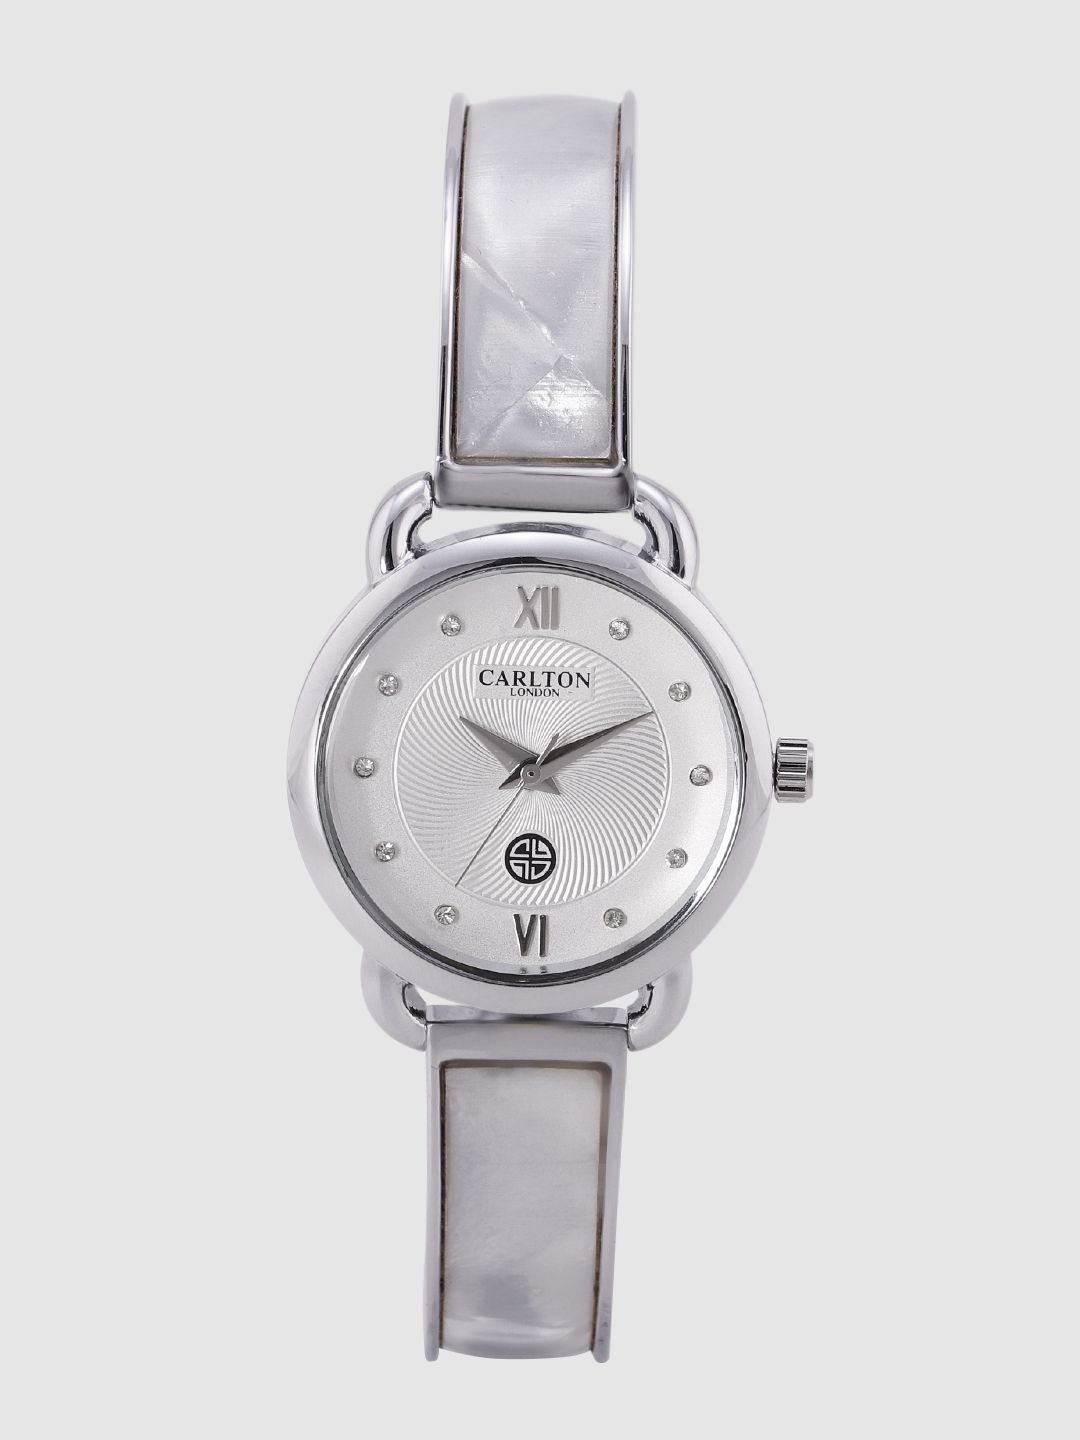 Carlton London Women Silver-Toned Analogue Watch CL026SSIS Price in India